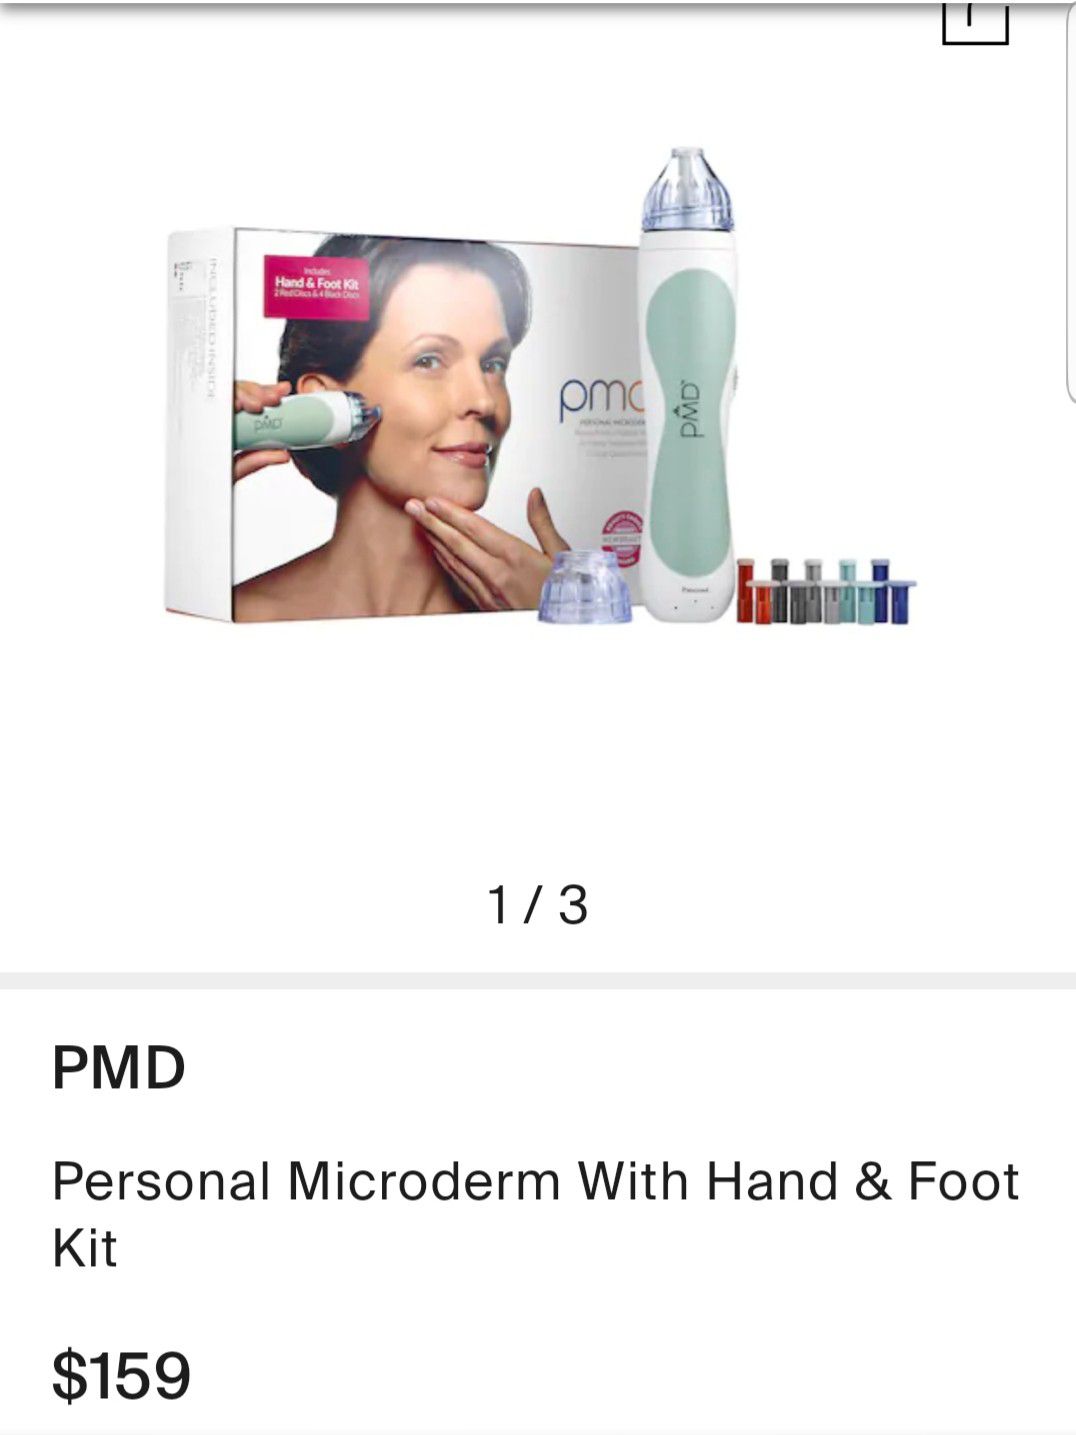 PMD personal microderm